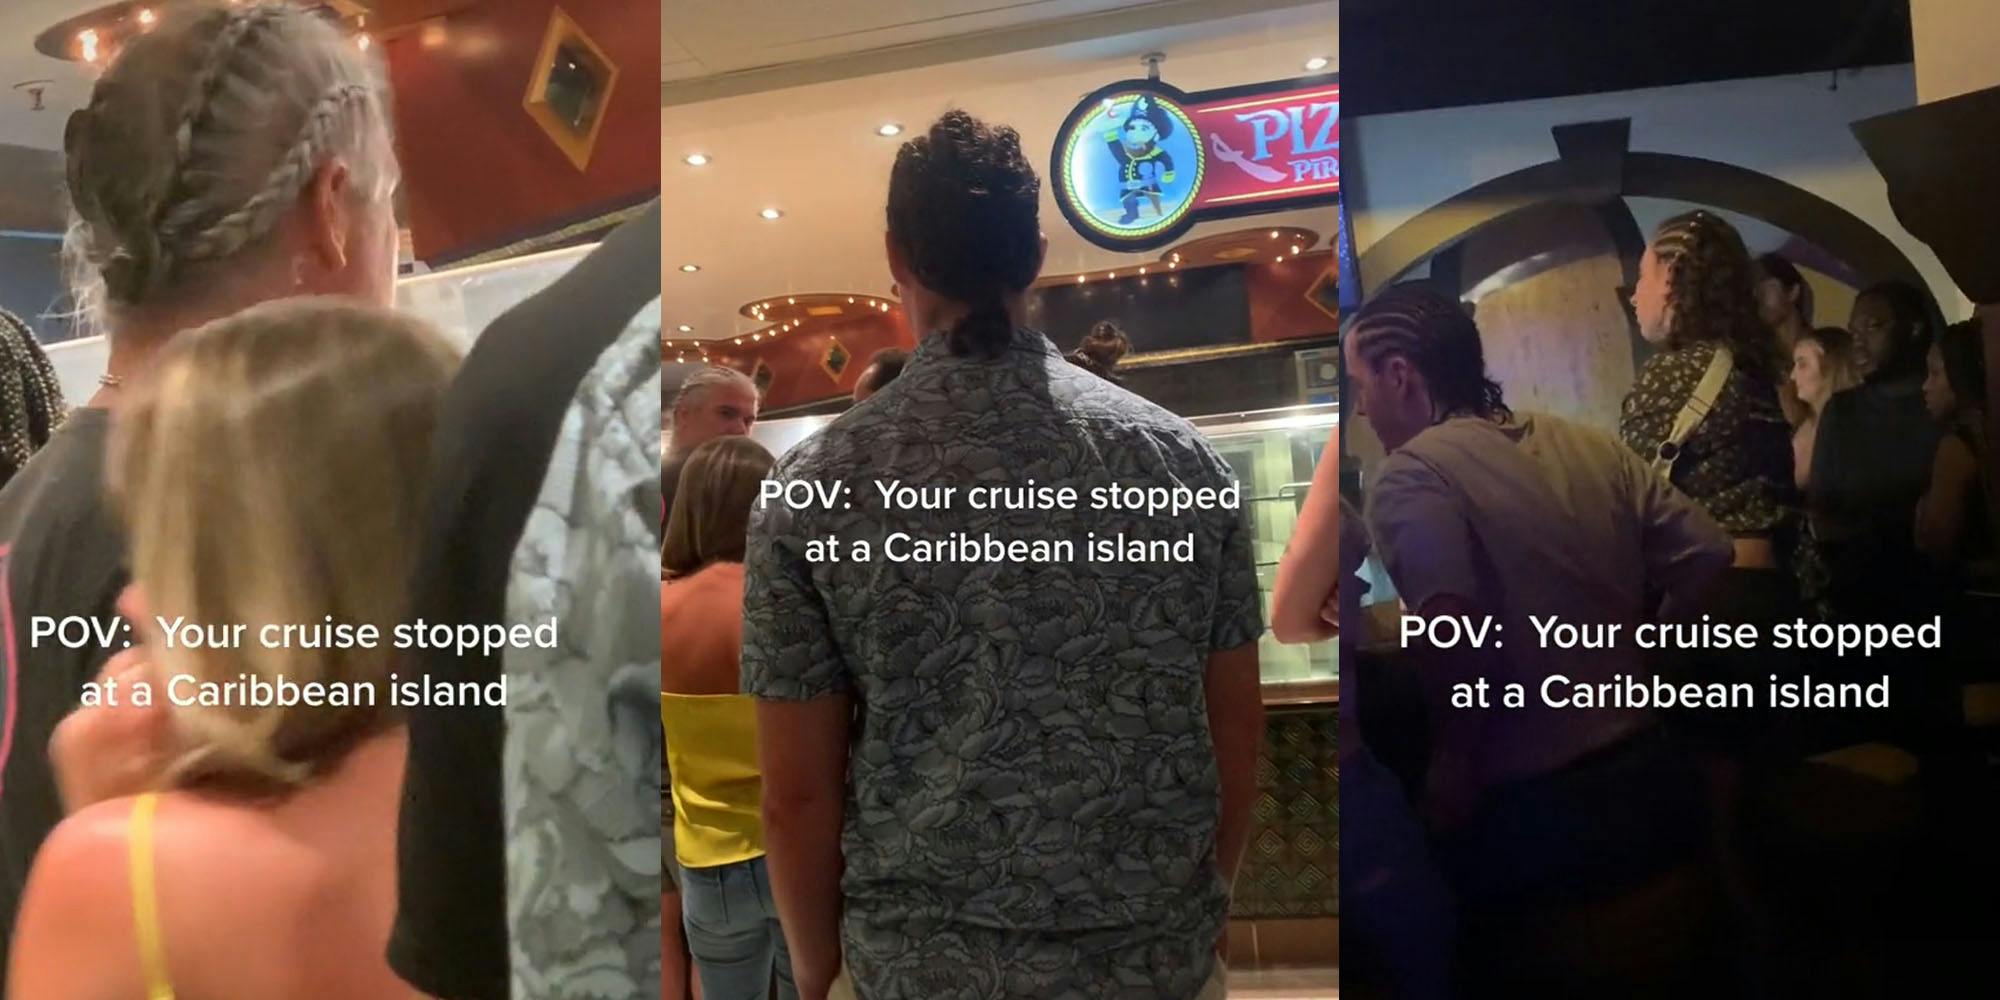 White man with gray hair and braids in group of people caption "POV: Your cruise stopped at a Caribbean island" (l) White man with dark hair and hair braided with couple in front of him caption "POV: Your cruise stopped at a Caribbean island" (c) White man with dark hair and white woman next to him at bar with braids and people staring at them caption "POV: Your cruise stopped at a Caribbean island" (r)